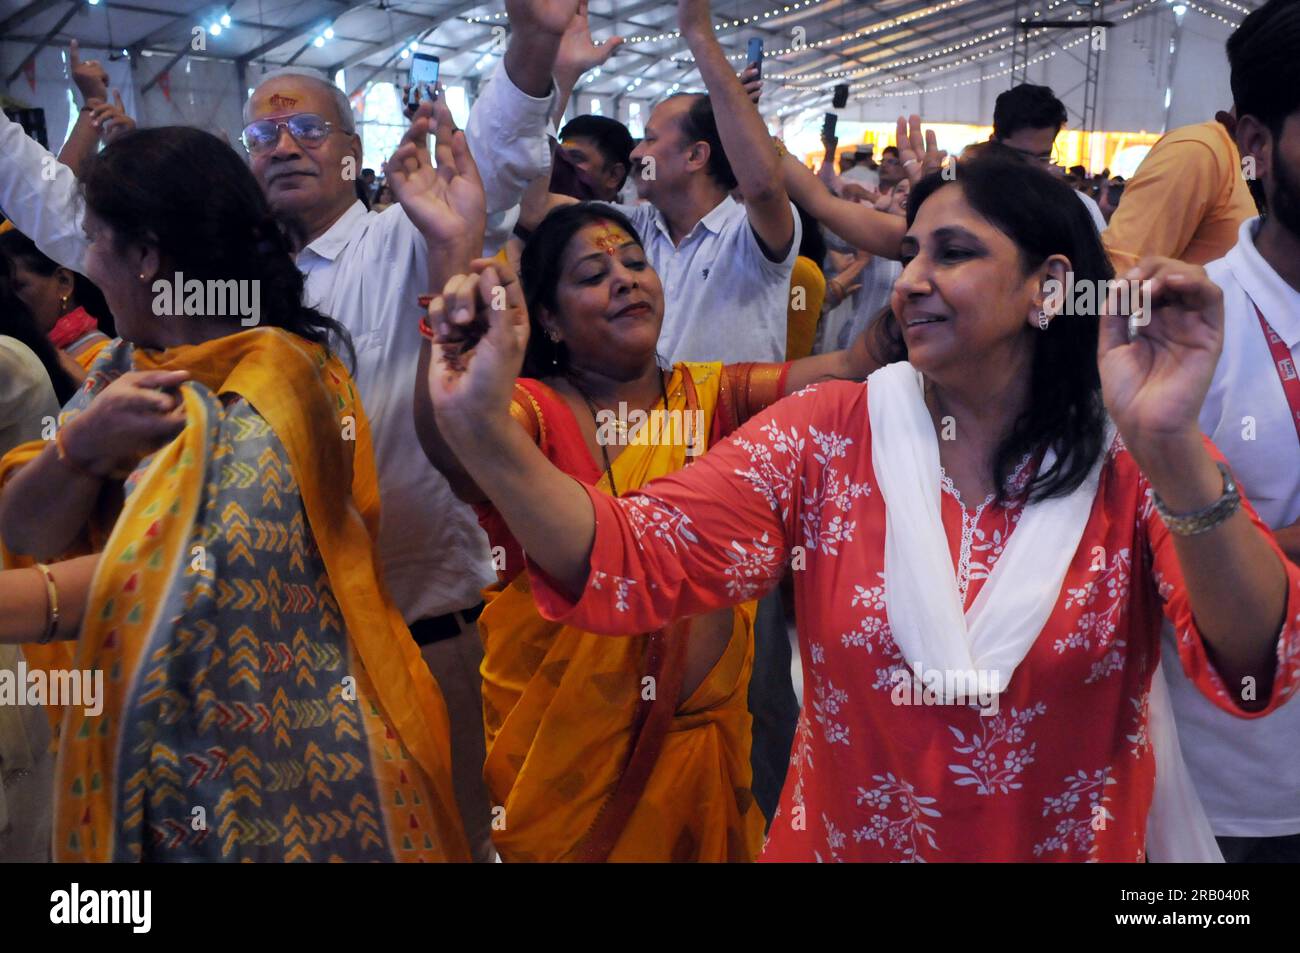 East Delhi, Delhi, India. 6th July, 2023. Devotees Dancing during the Lord Hanuman devotee Pandit Dhirendra Shastri blessing and being Greeted by Devotees during arrival for Three Day Katha Vachan.Pandit Dhirendra Krishna Shastri of Bageshwar Dham at Ramlila Maidan, IP Extension, Delhi. Divine Darbar, Kalash Yatra and Havan are also being organized in this. According to the local people, people from all the surrounding areas including Delhi are reaching here.Pandit Pandit Dhirendra Krishna Shastri will be present at the Divya Darbar at the venue of the event. Big screens are being installed Stock Photo